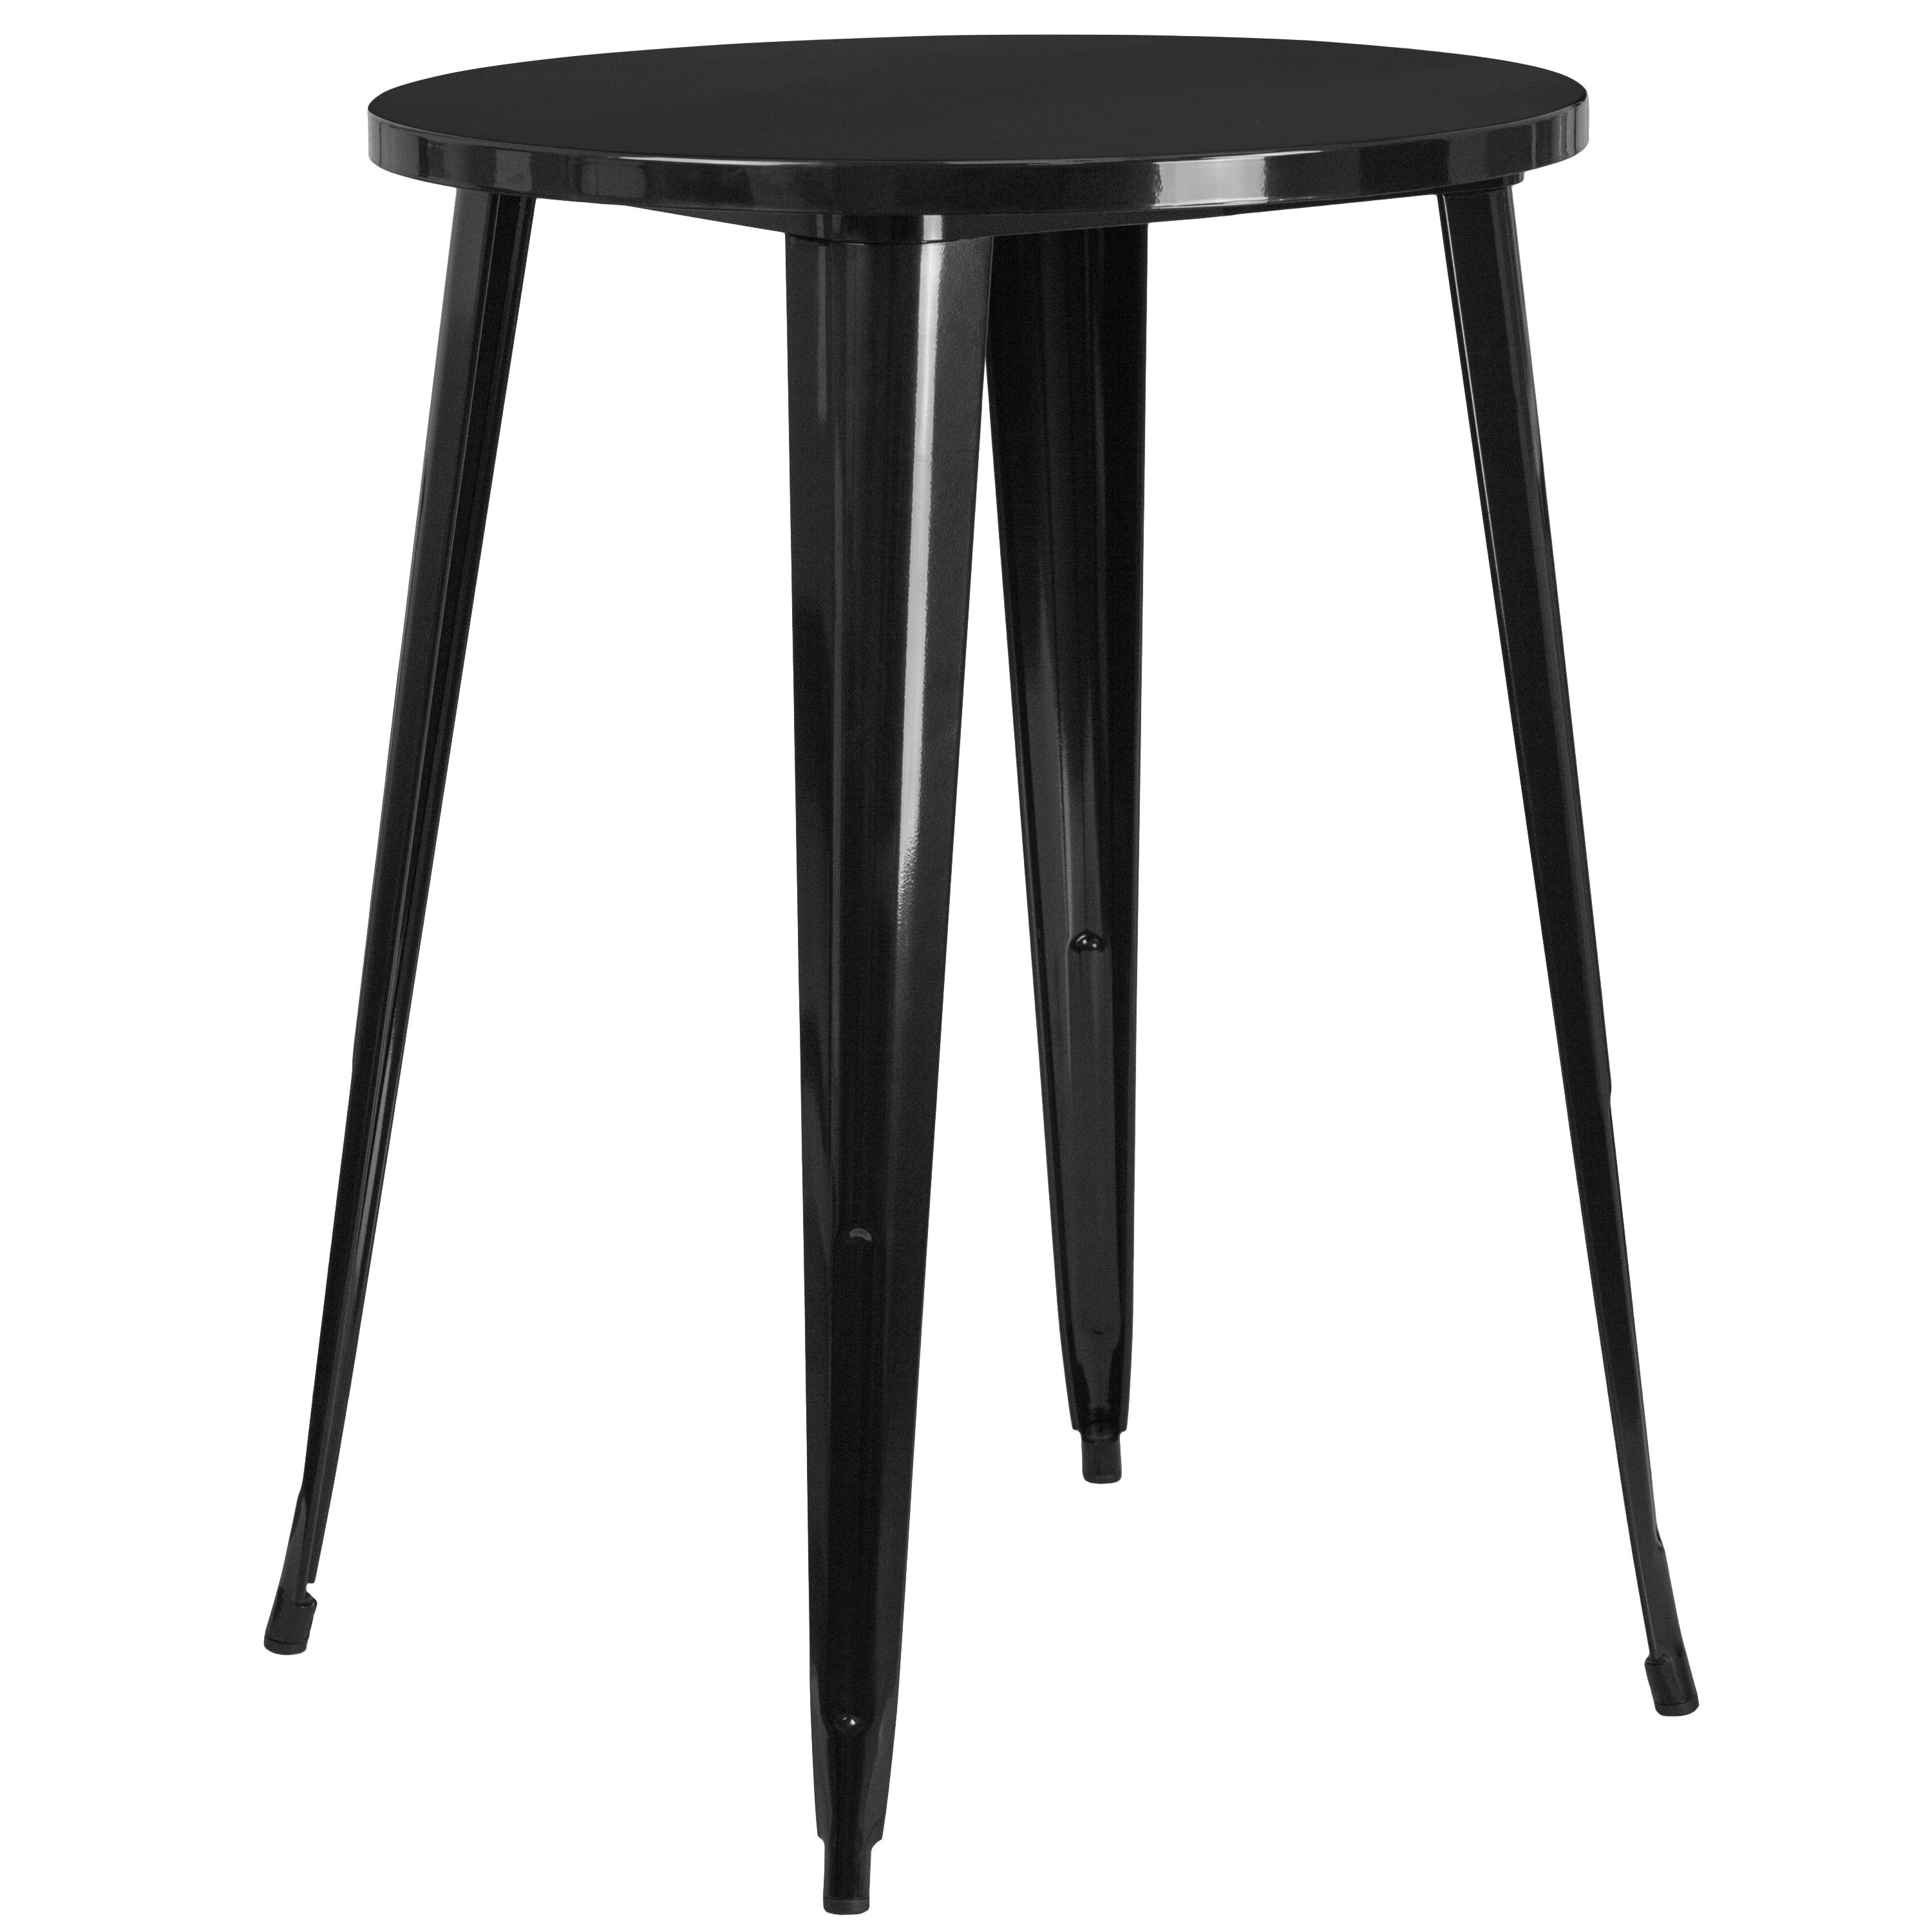 Flash Furniture Commercial Grade 30" Round Black Metal Indoor-Outdoor Bar Height Table - image 1 of 3